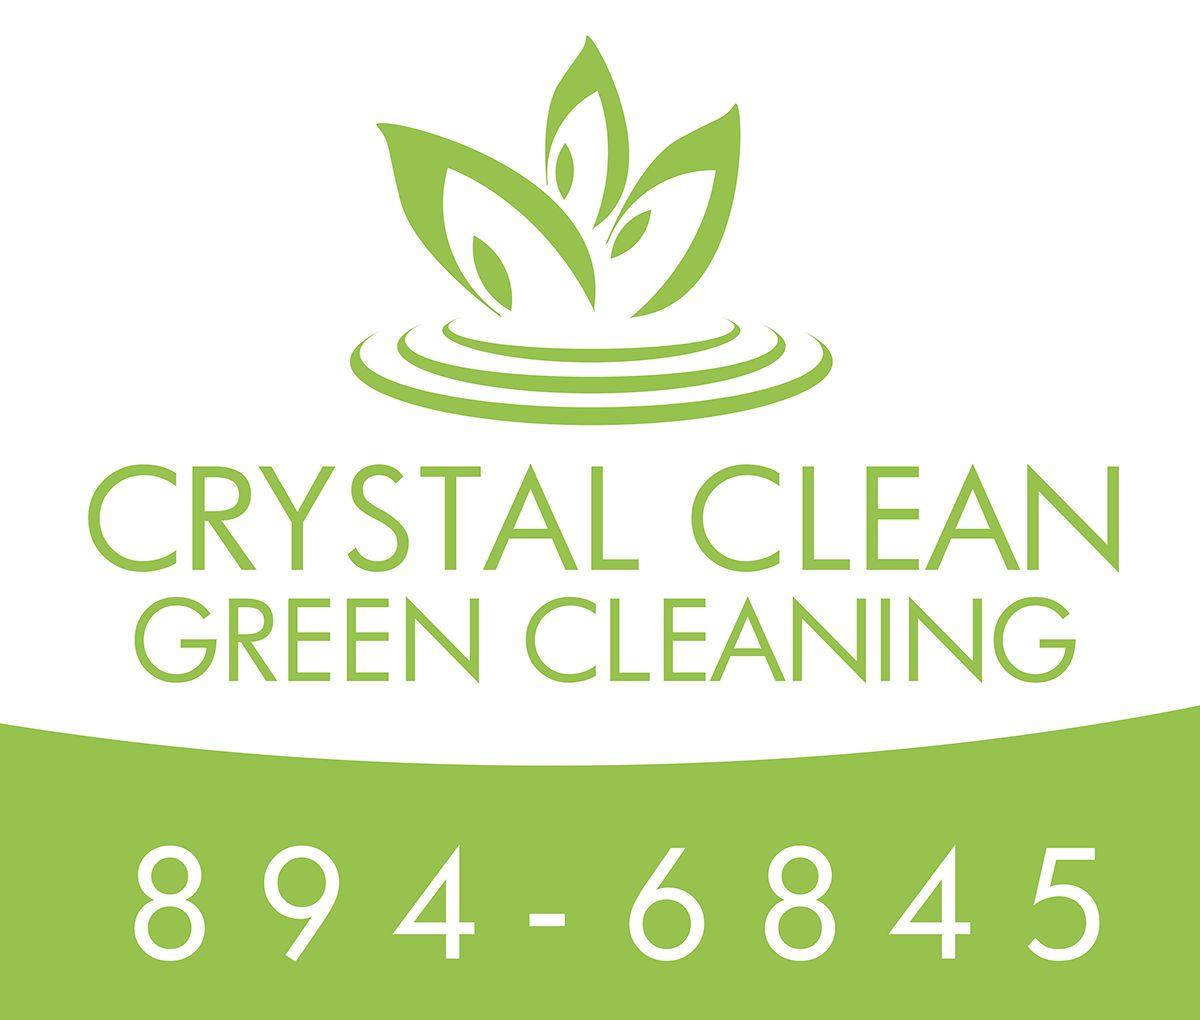 Green Cleaning Company Logo - Crystal Clean Green Cleaning House Cleaning Services